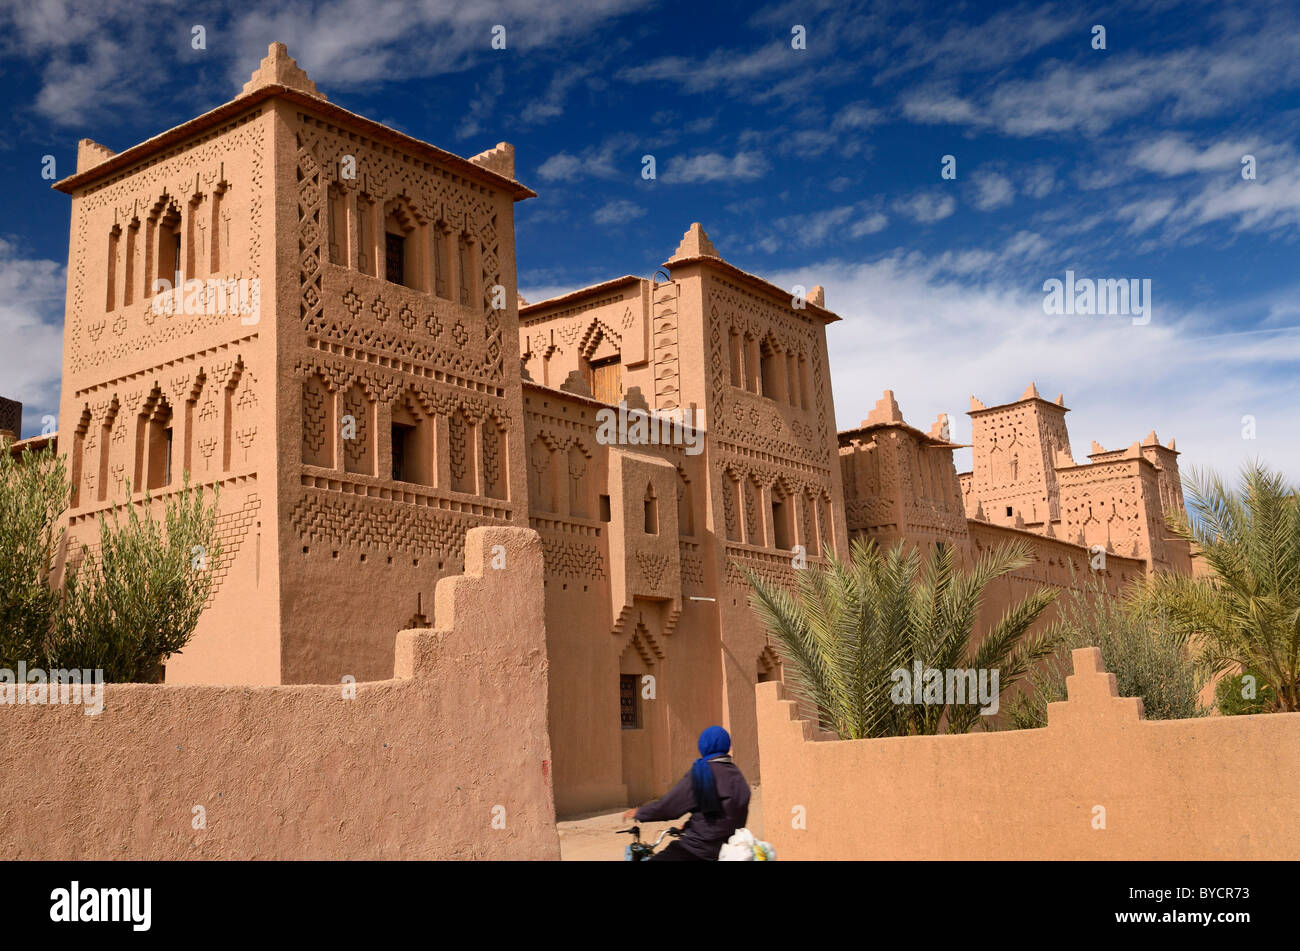 Refurbished towers of the ancient heritage site Kasbah Amerhidl ochre earth fortress in the Skoura oasis Morocco Stock Photo